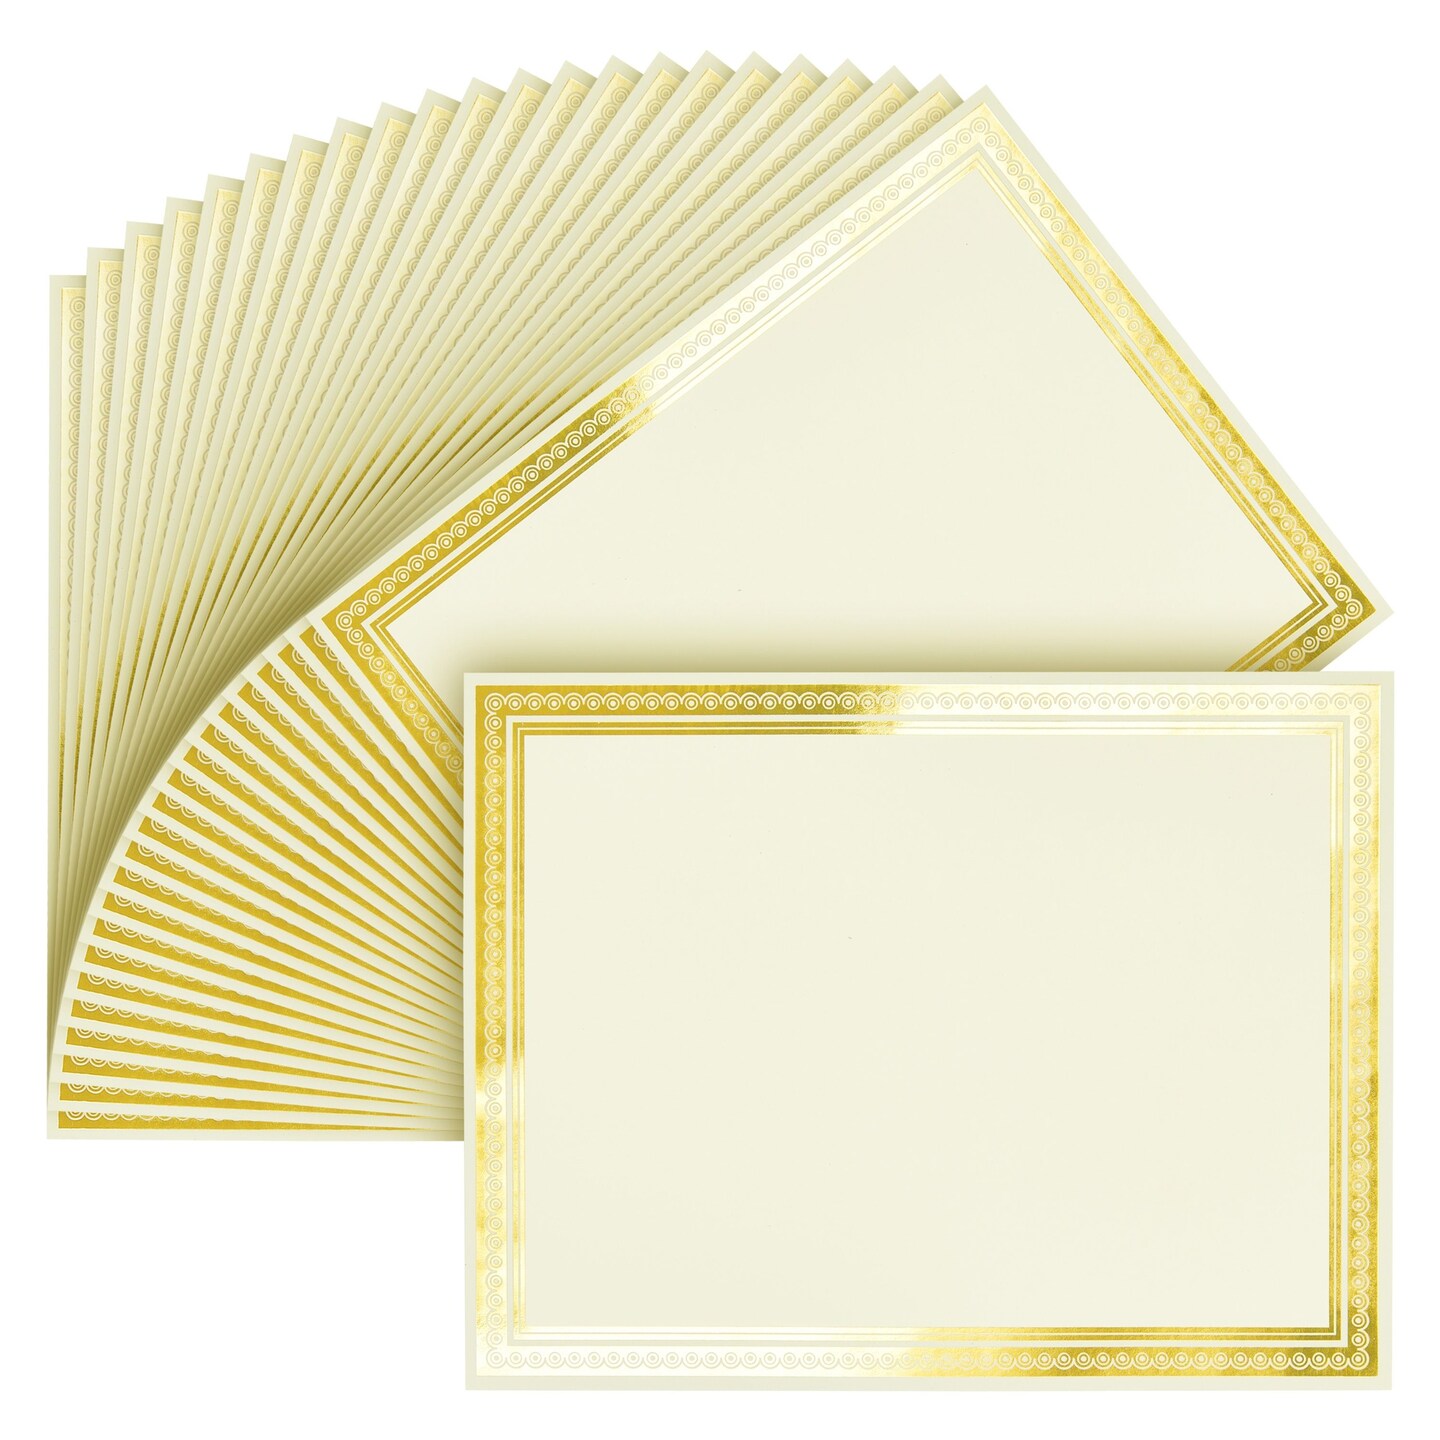 50 Sheets Gold Foil Certificate Paper for Printing - Customizable Blank  Cardstock with Border for Graduation Diploma, Achievement Awards,  Recognition Documents (8.5 x 11 in, Ivory)